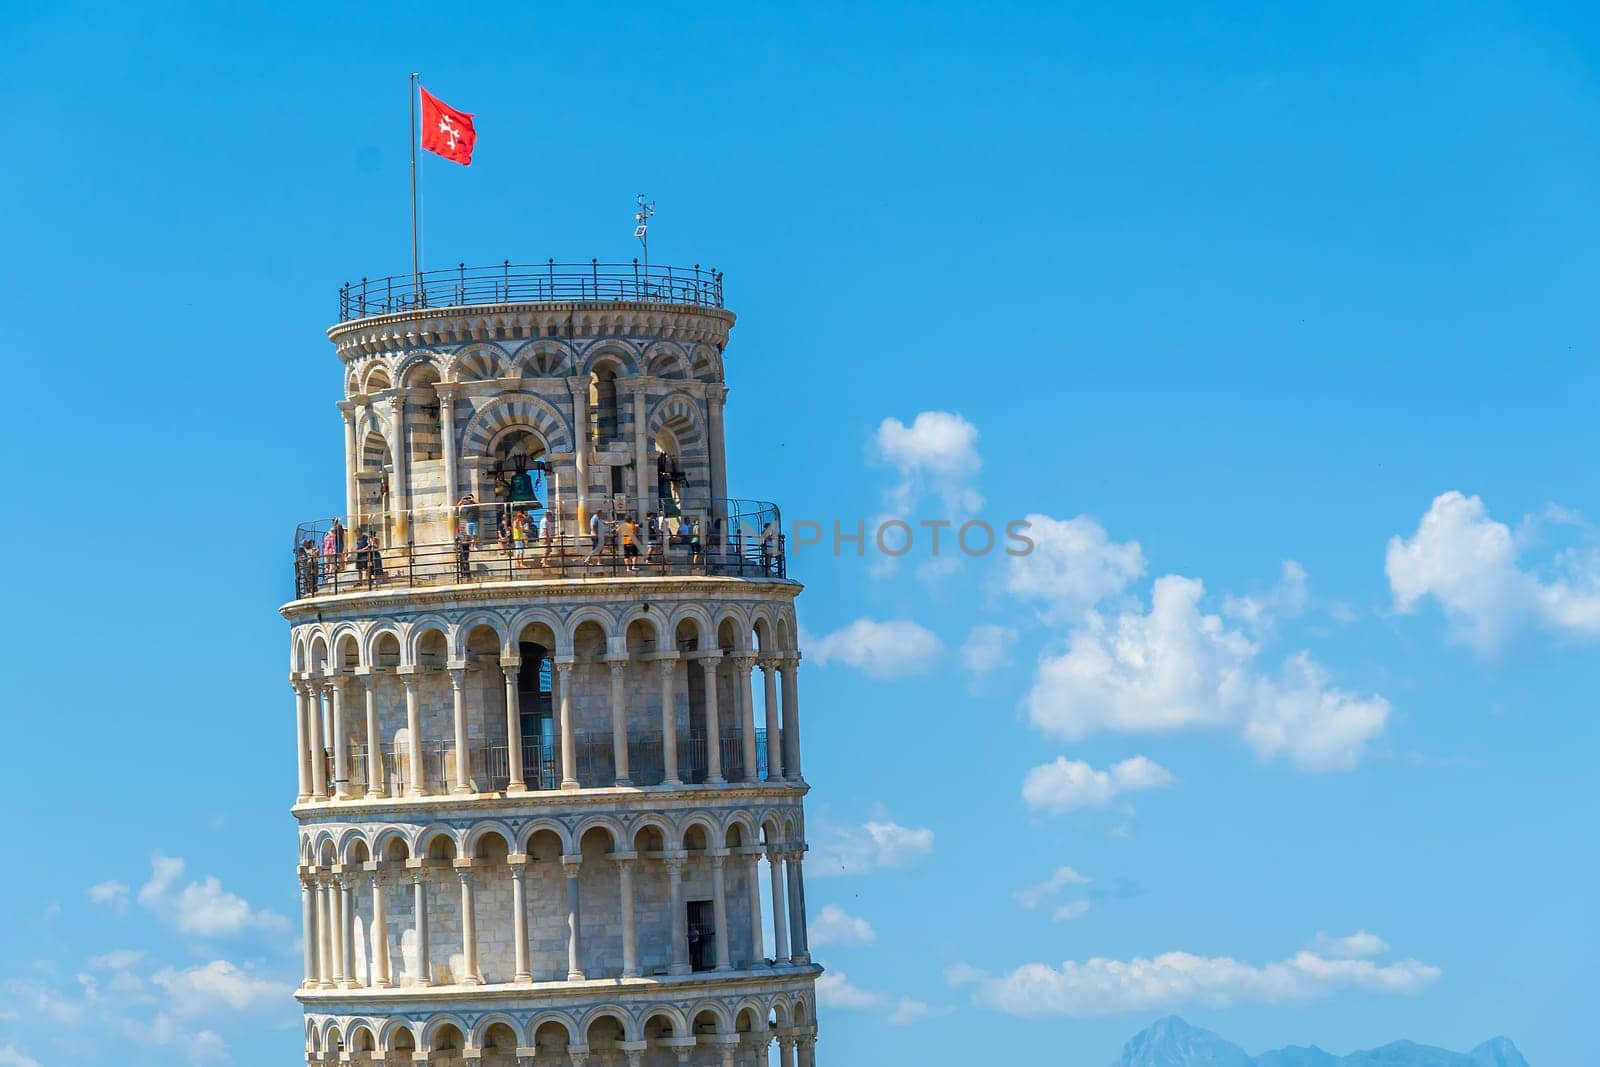 The famous Leaning Tower in Pisa, Italy with beautiful blue sky